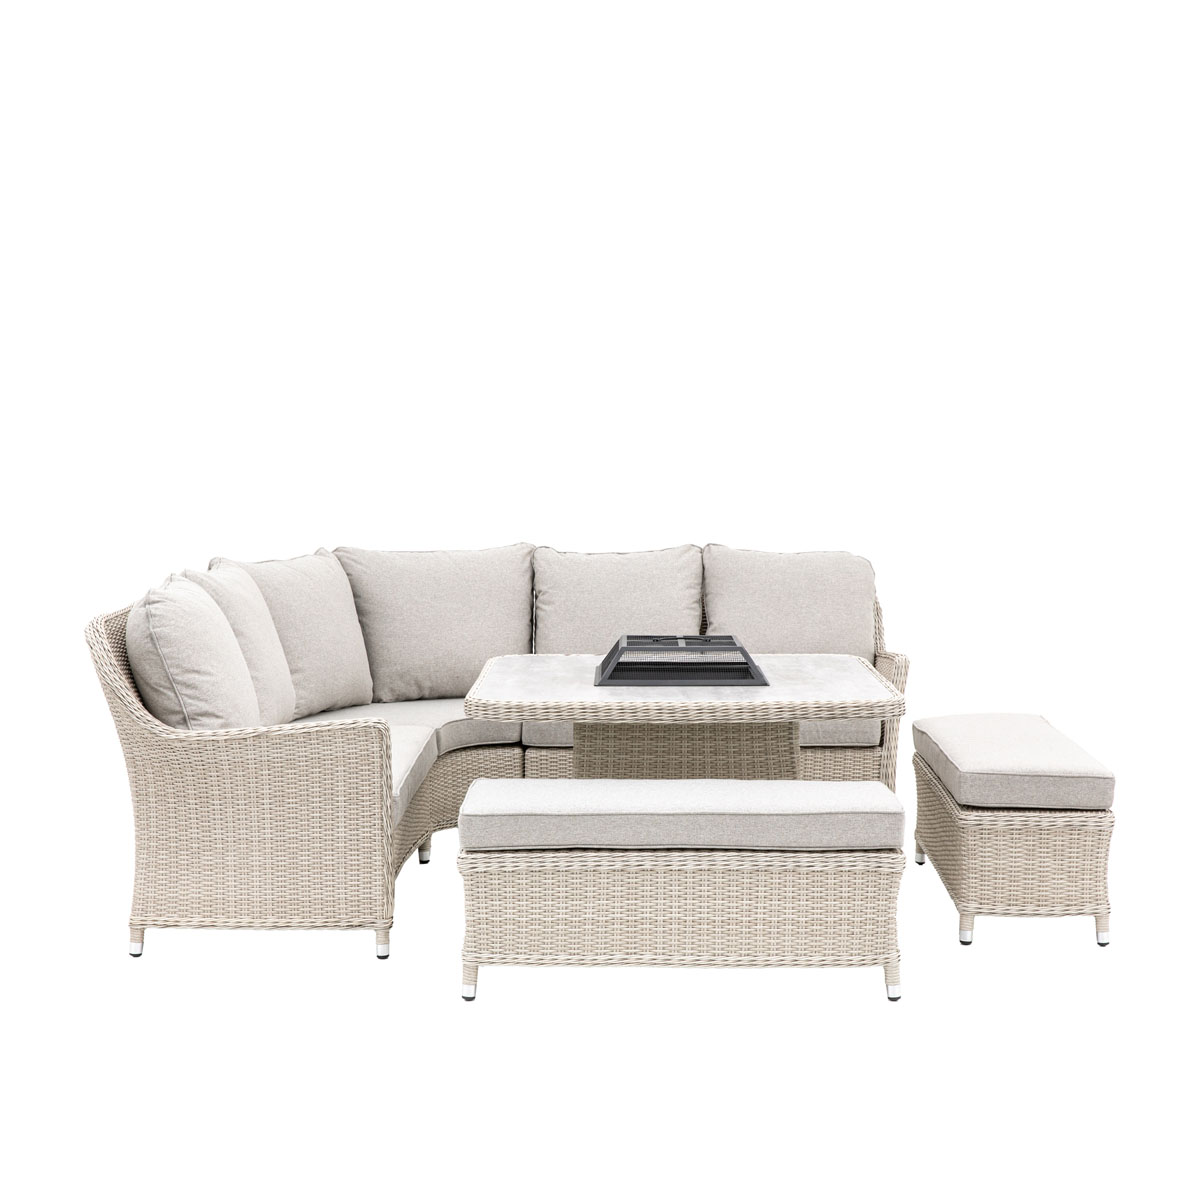 Holton Corner Square Dining Set with Fire Pit